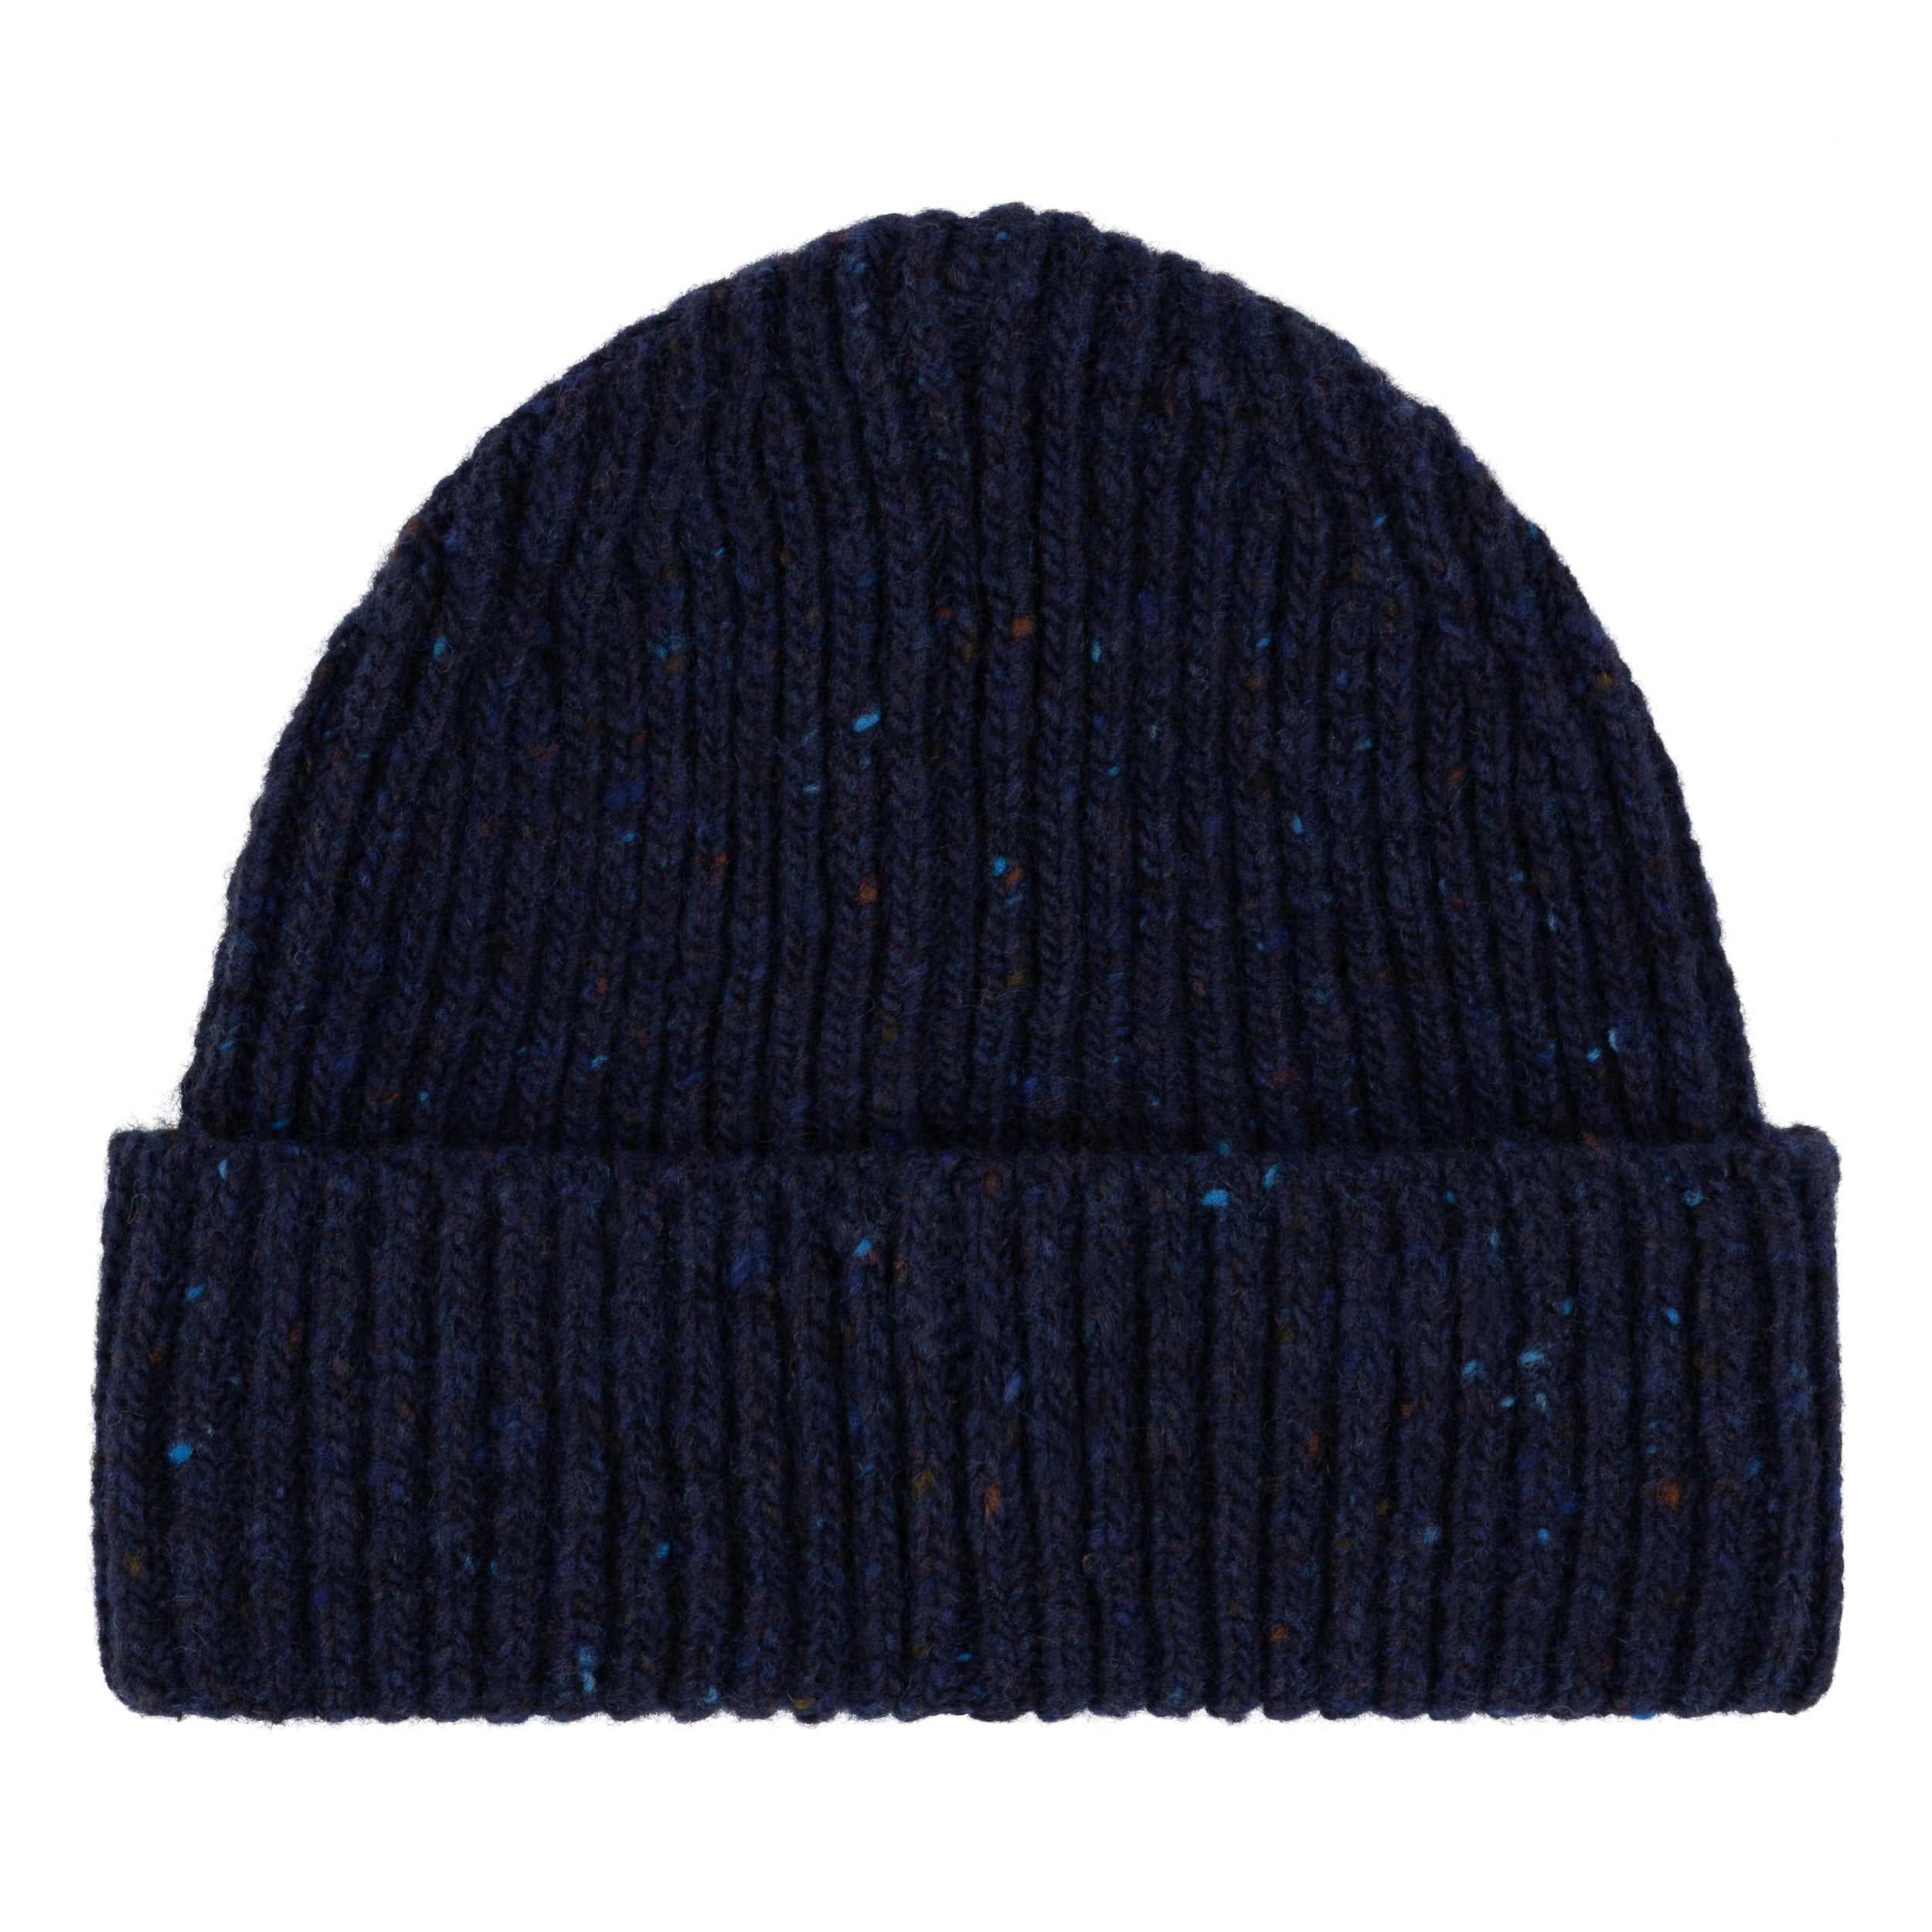 Carrier Company Navy Donegal Wool Hat